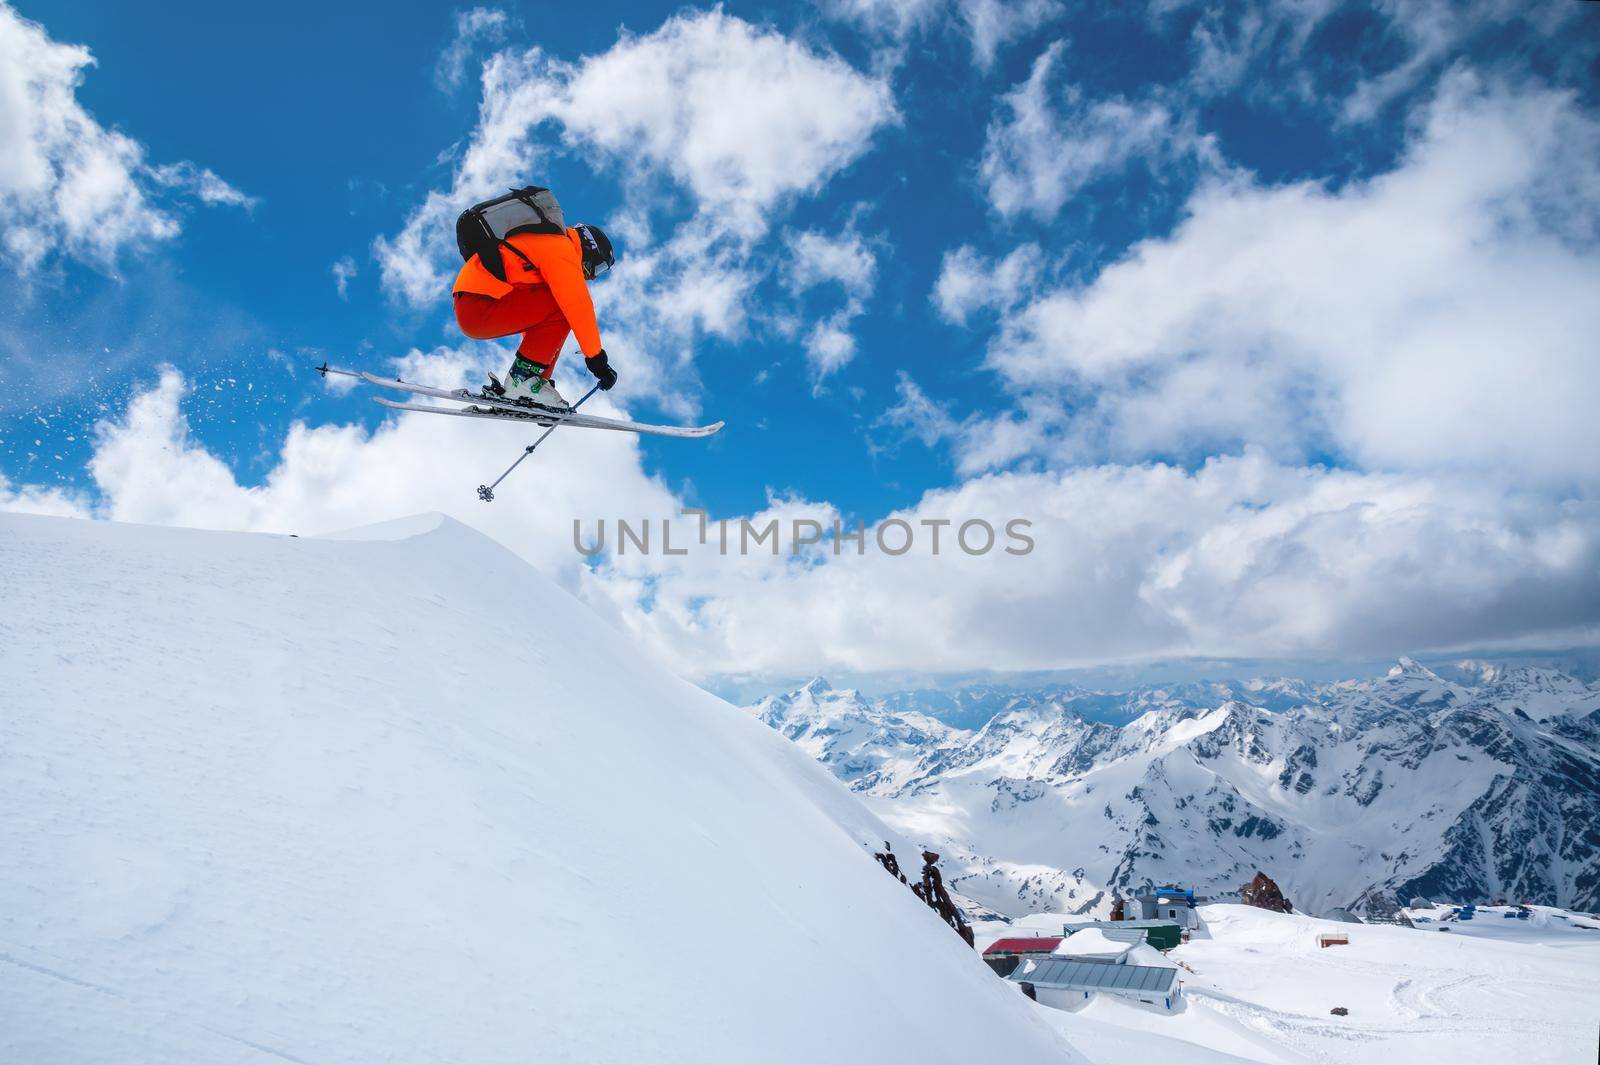 A professional skier in an orange suit jumps from a high cliff against a background of blue sky and clouds, leaving a trail of snow powder in the mountains. by yanik88